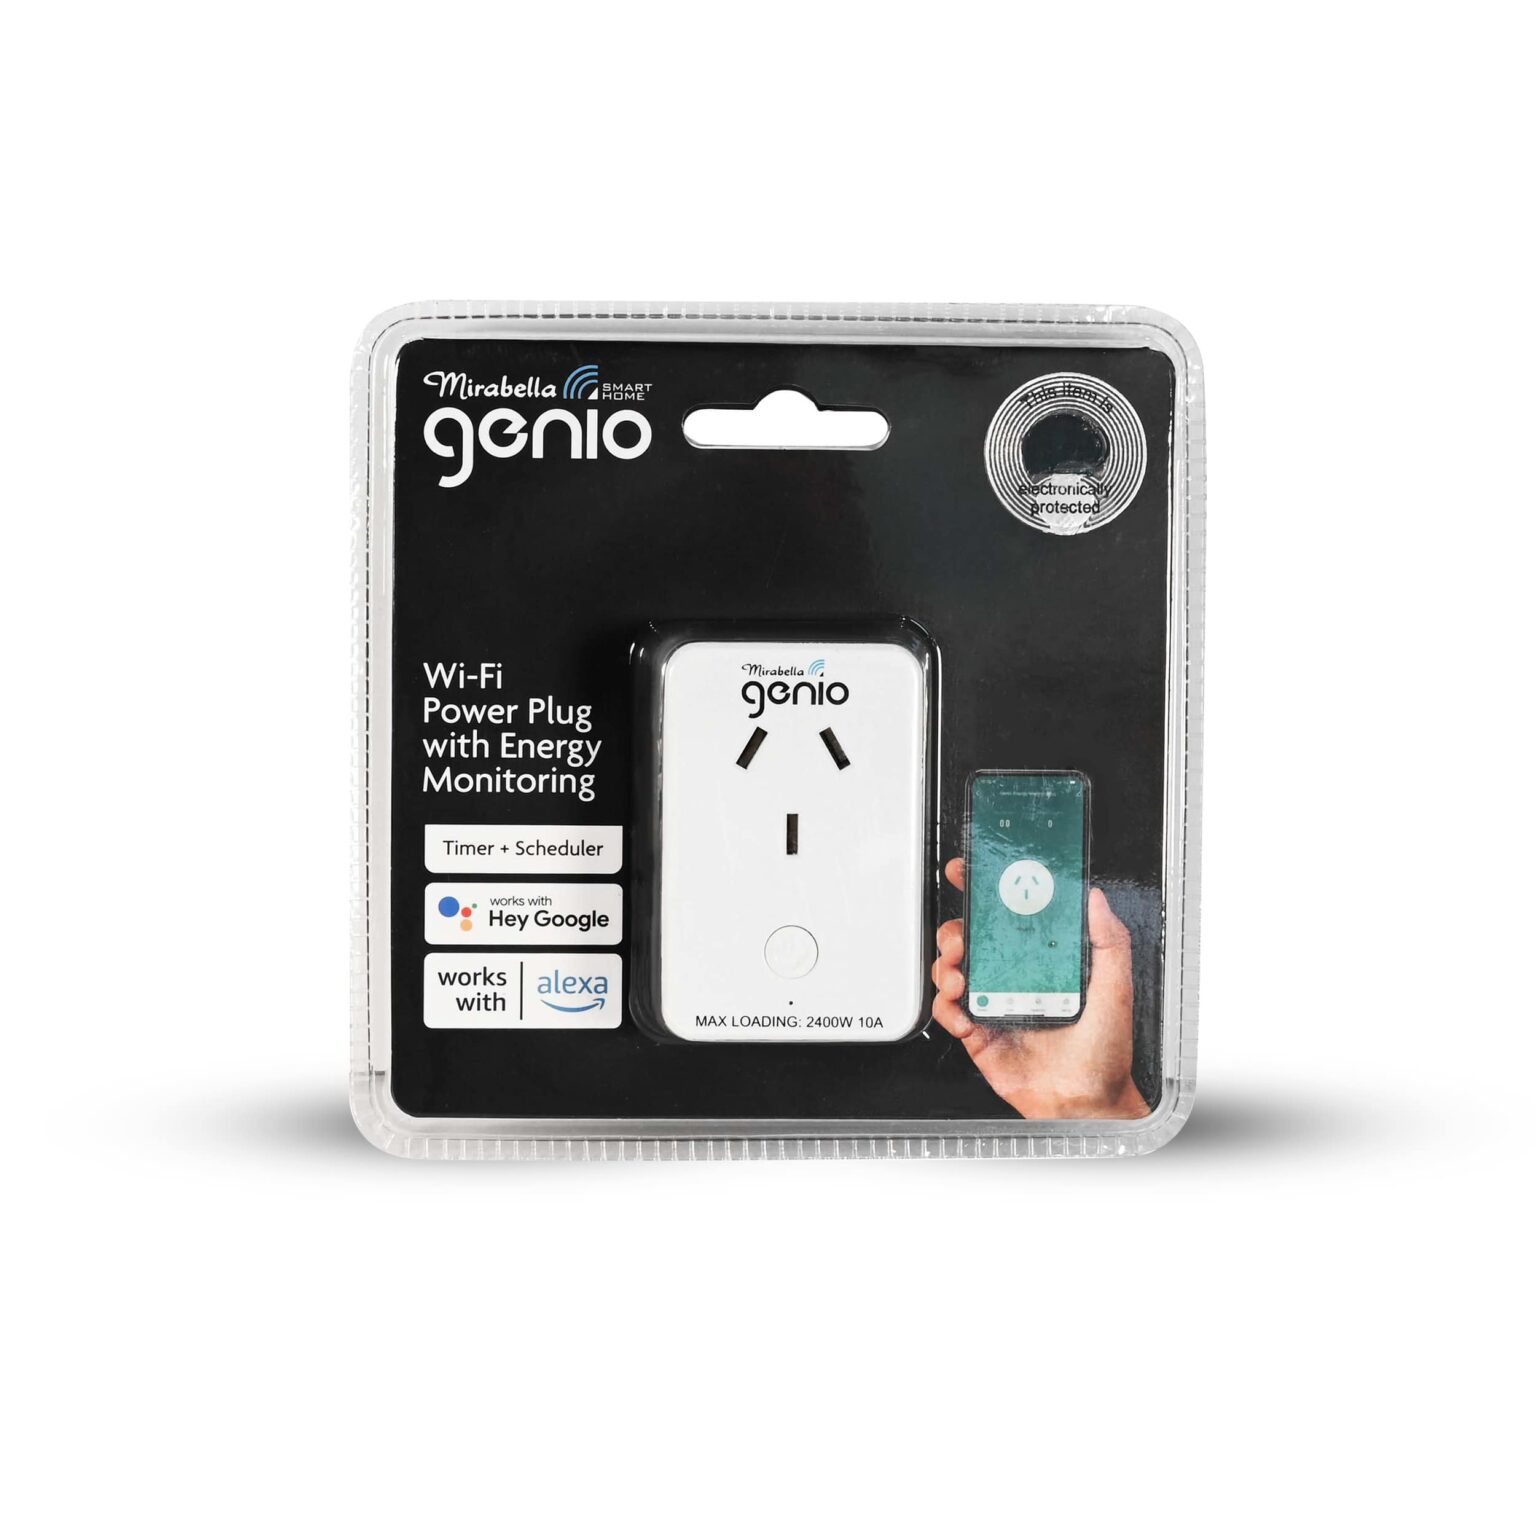 home wifi booster device